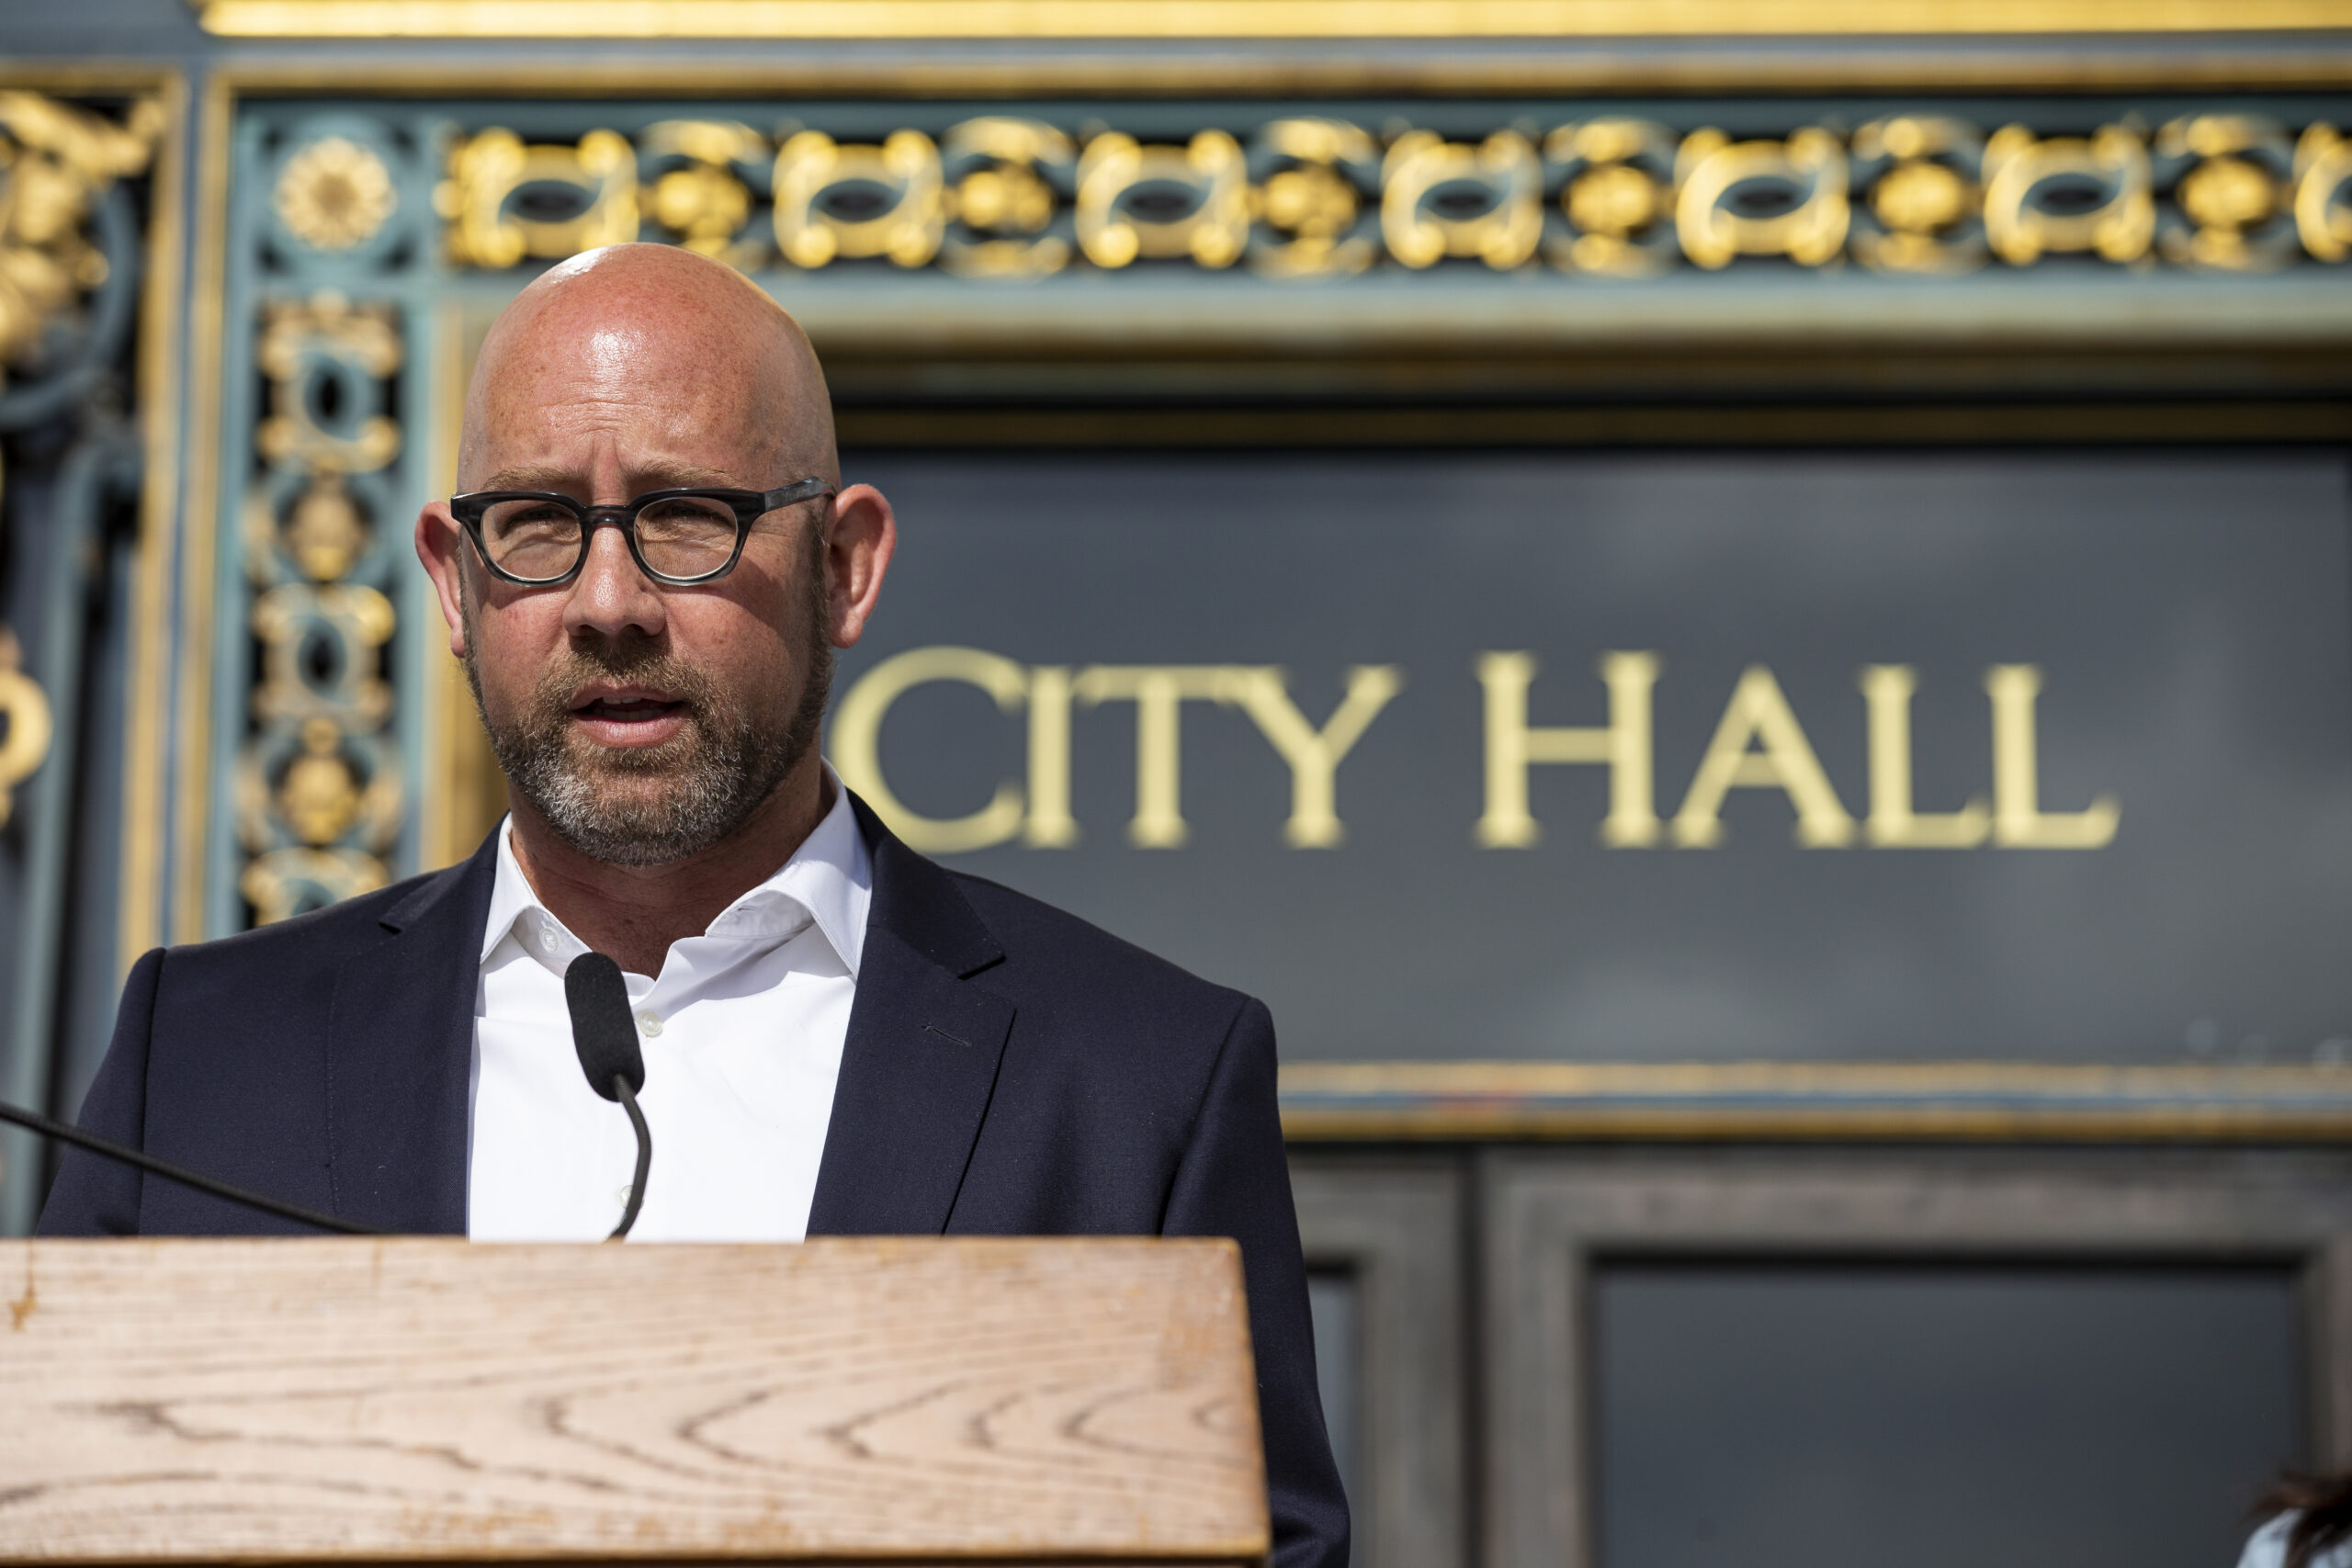 A bald man with glasses speaks at a podium marked “CITY HALL” in the background.